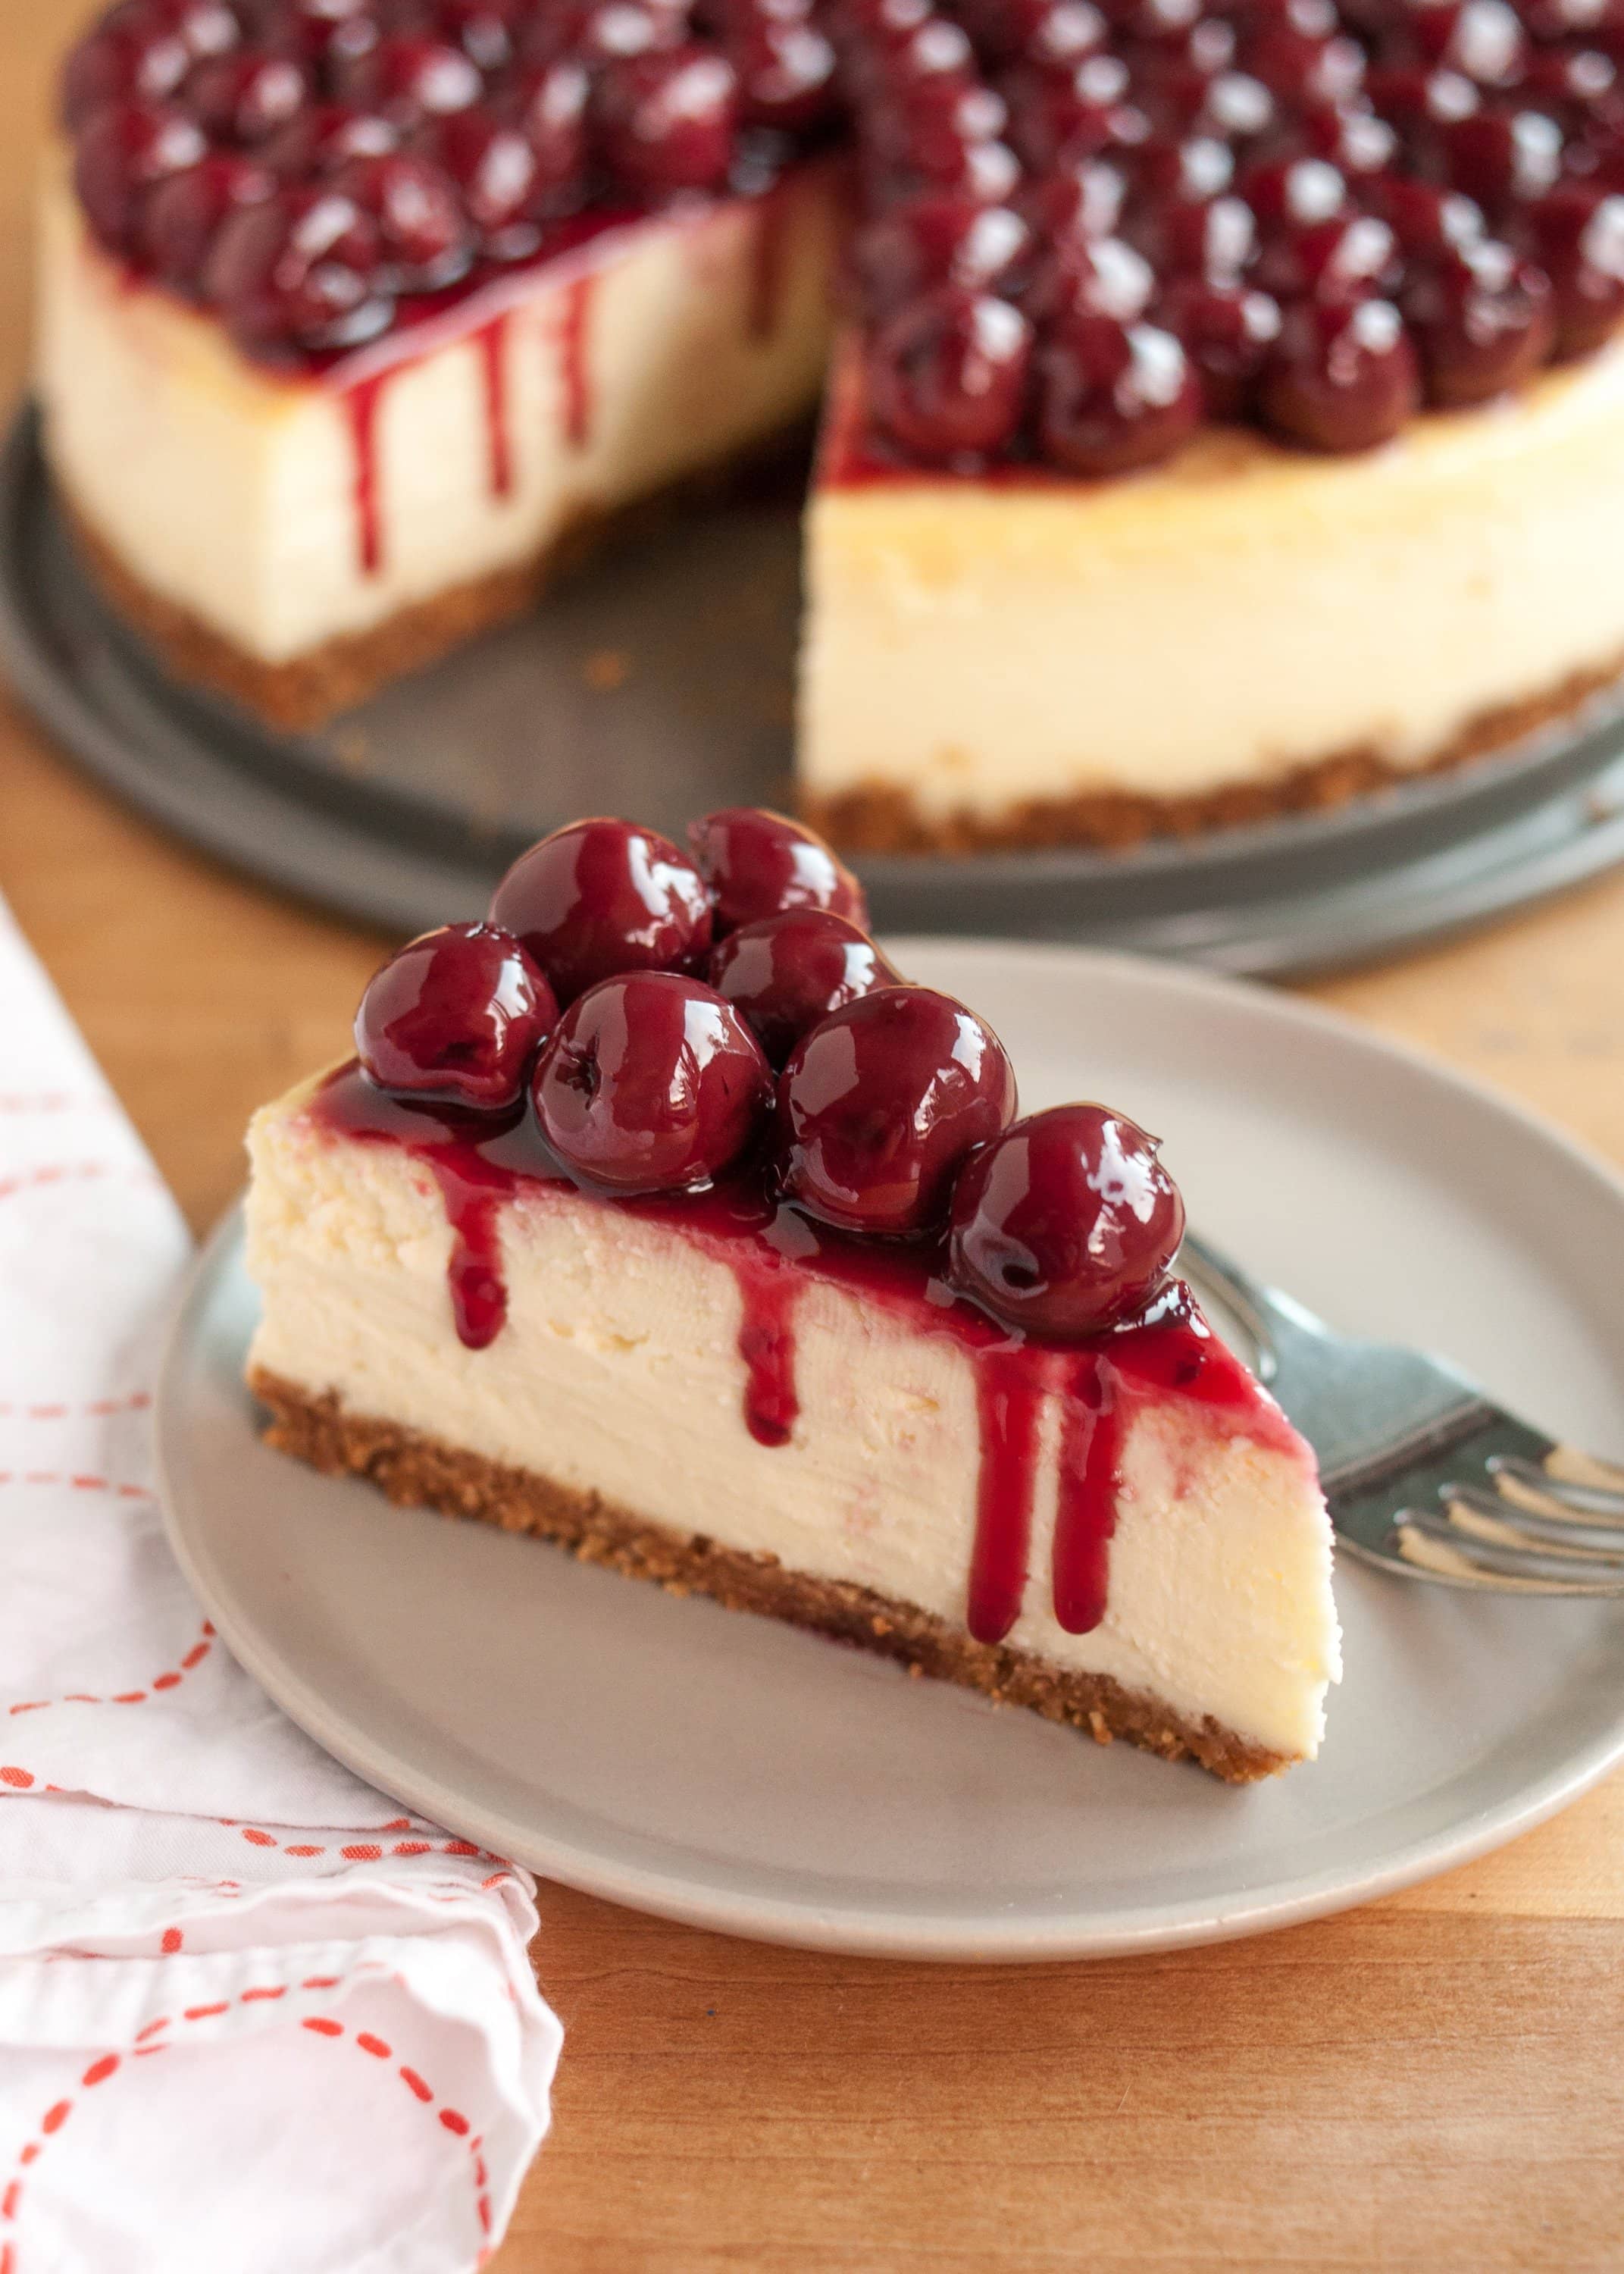 How To Make Perfect Cheesecake - Step-by-Step Recipe | Kitchn